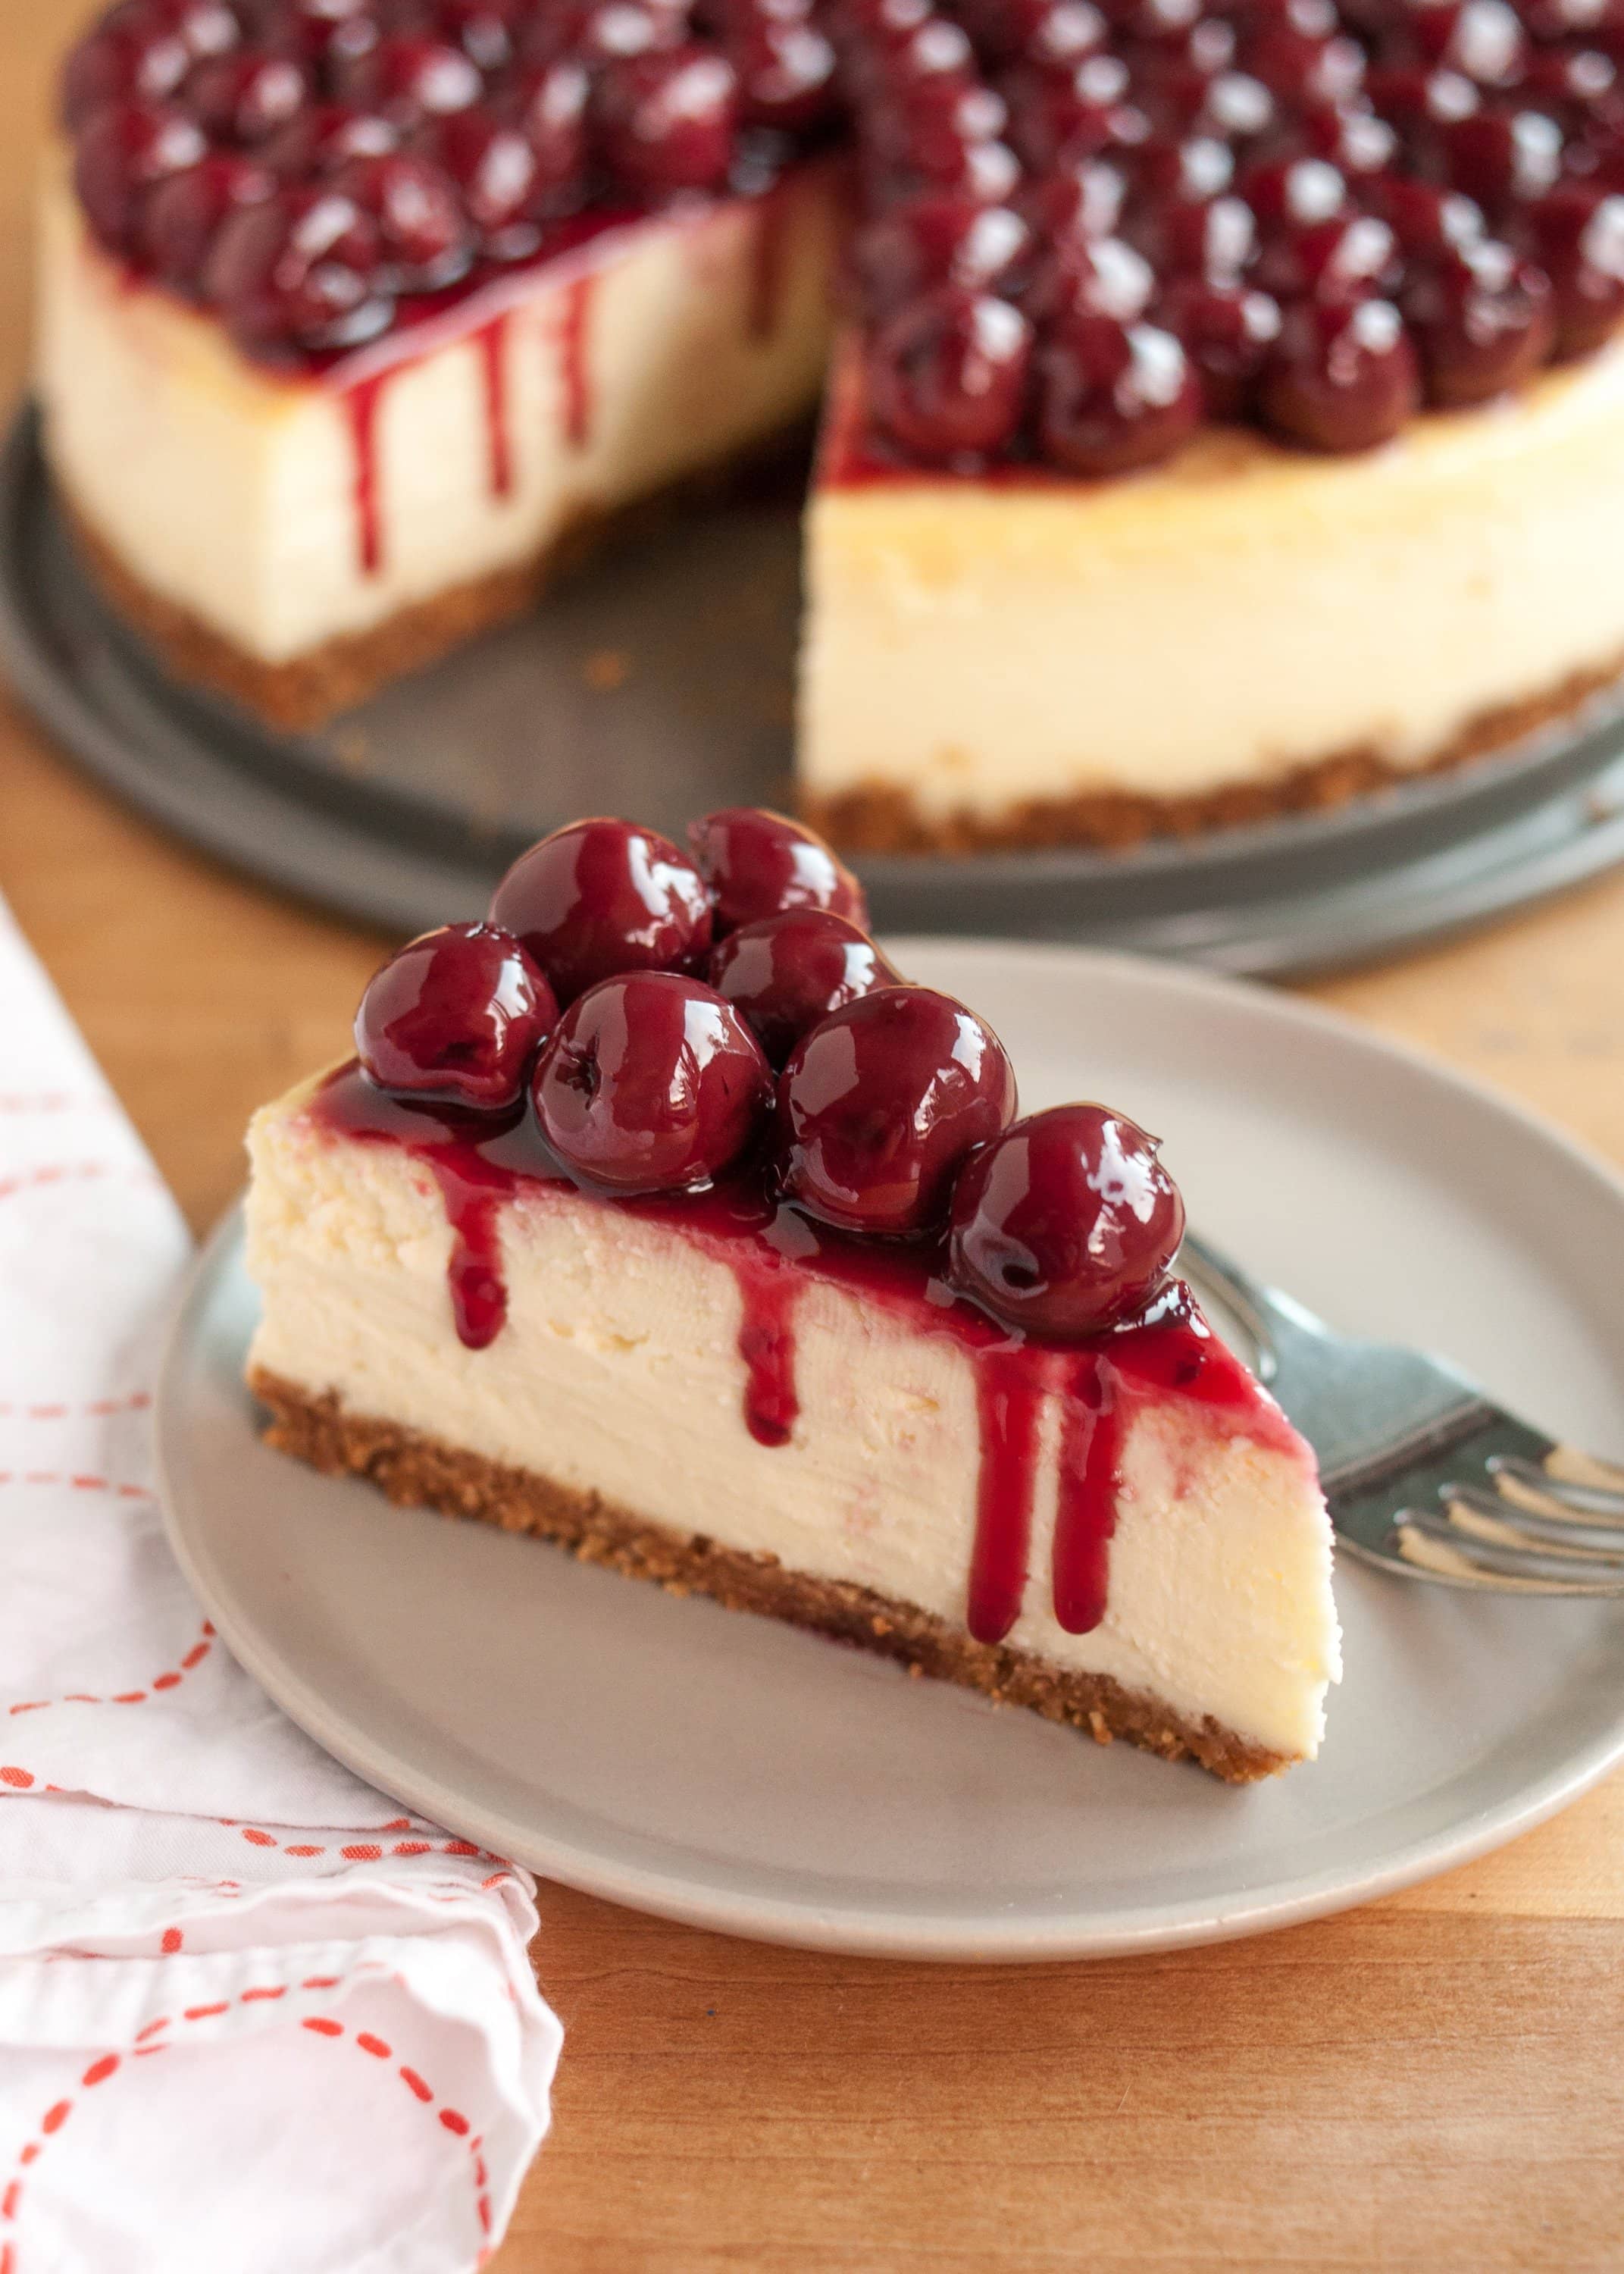 How To Make Perfect Cheesecake - Step-by-Step Recipe | Kitchn